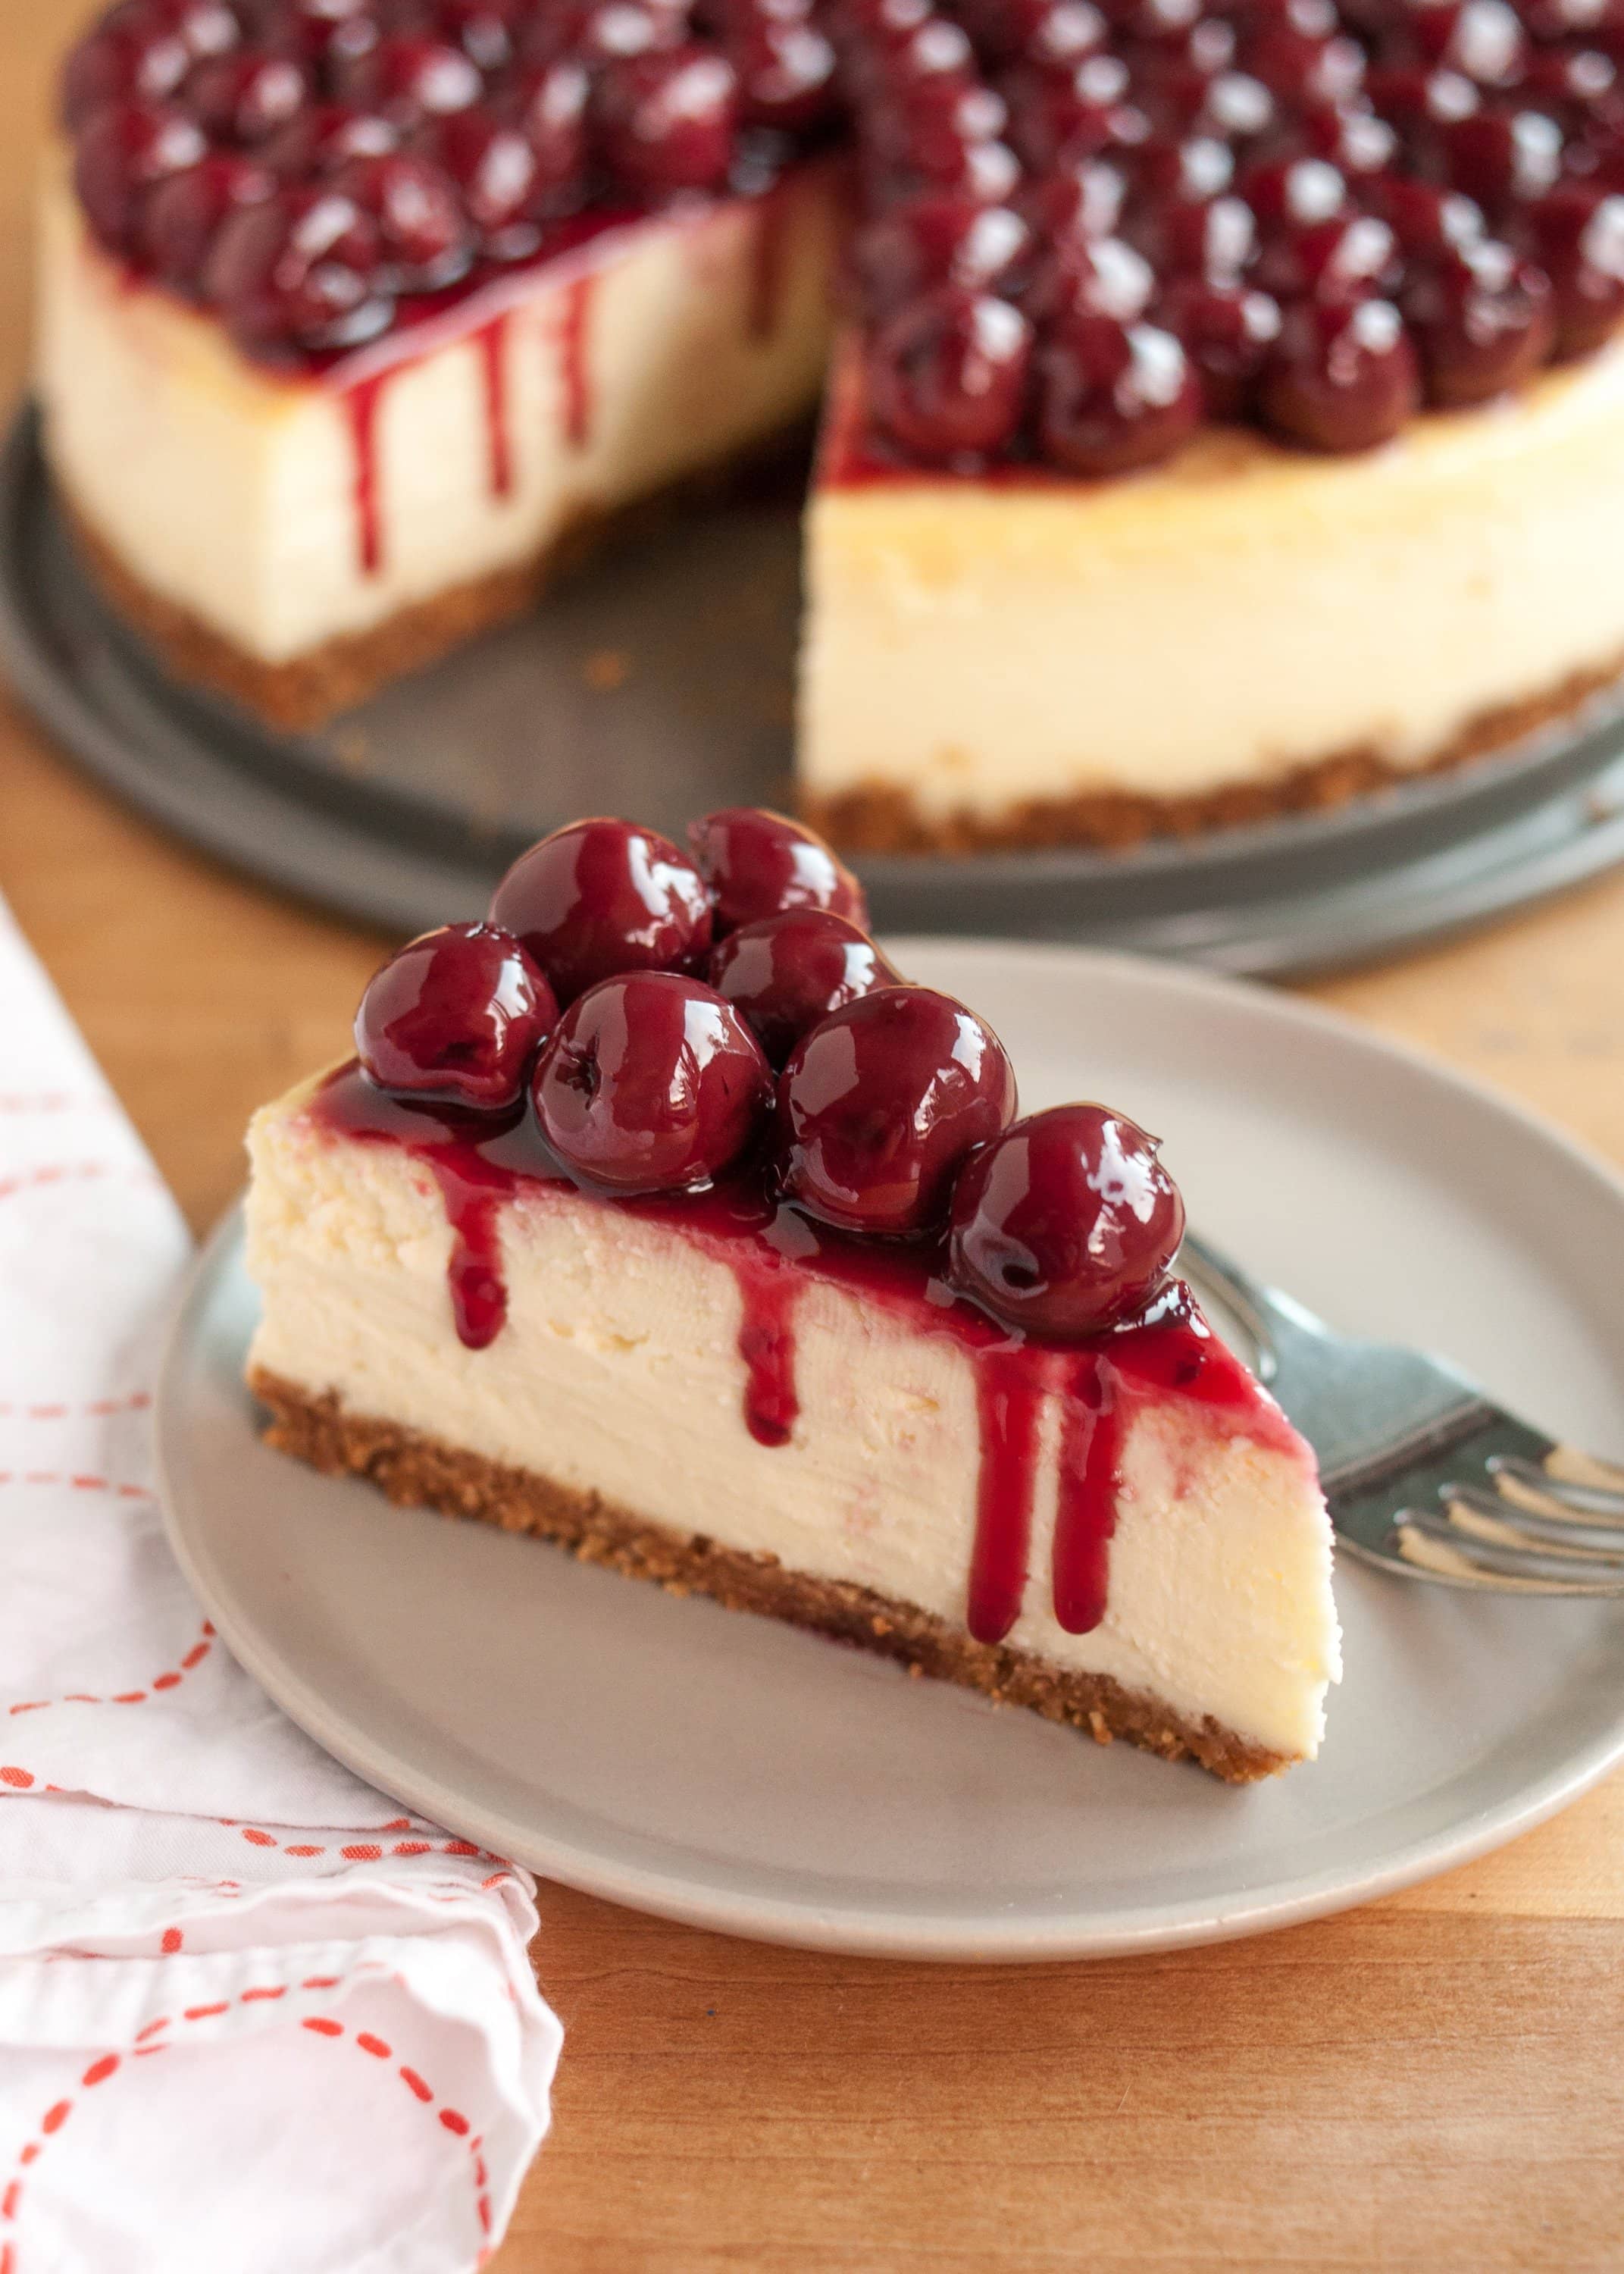 How To Make Perfect Cheesecake - Step-by-Step Recipe | Kitchn